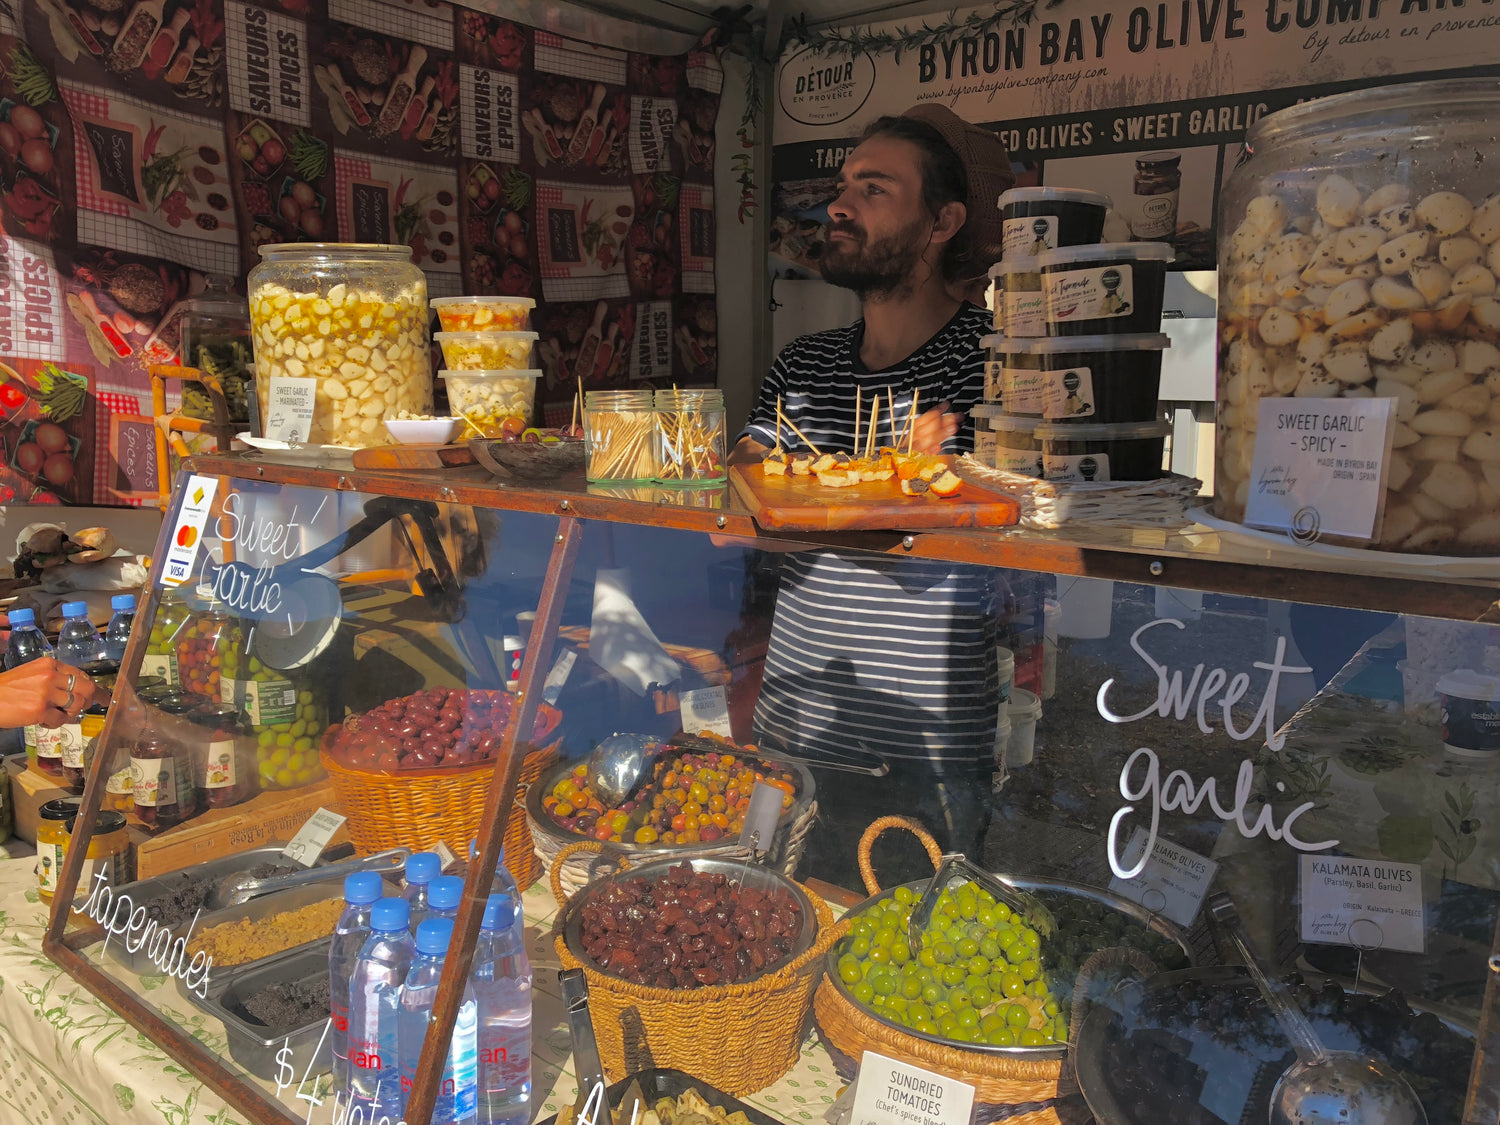 Antoine Quezel is the founder, owner, and general manager of Byron Bay Olive Co.